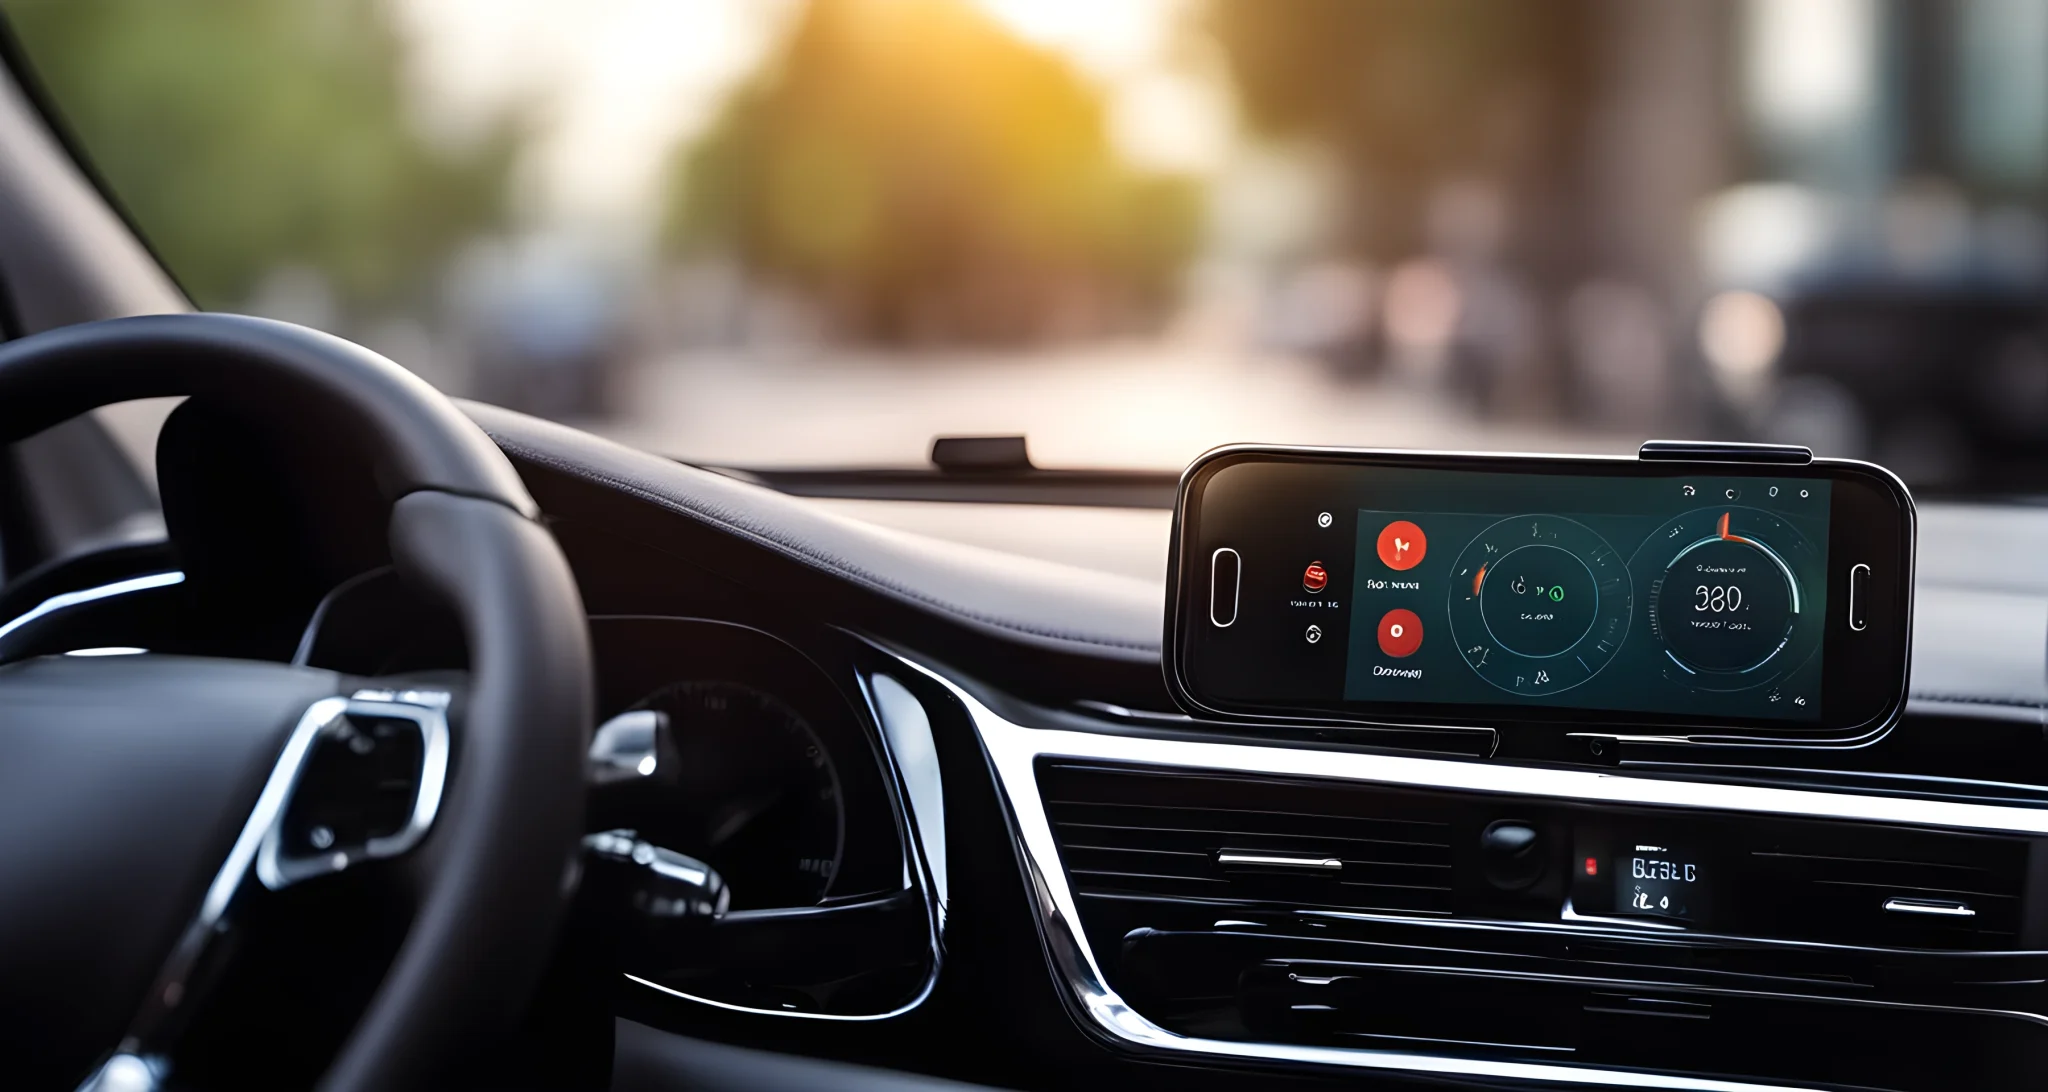 The image shows a smartphone integrated with a car dashboard, with the driver using the phone to control various car functions.